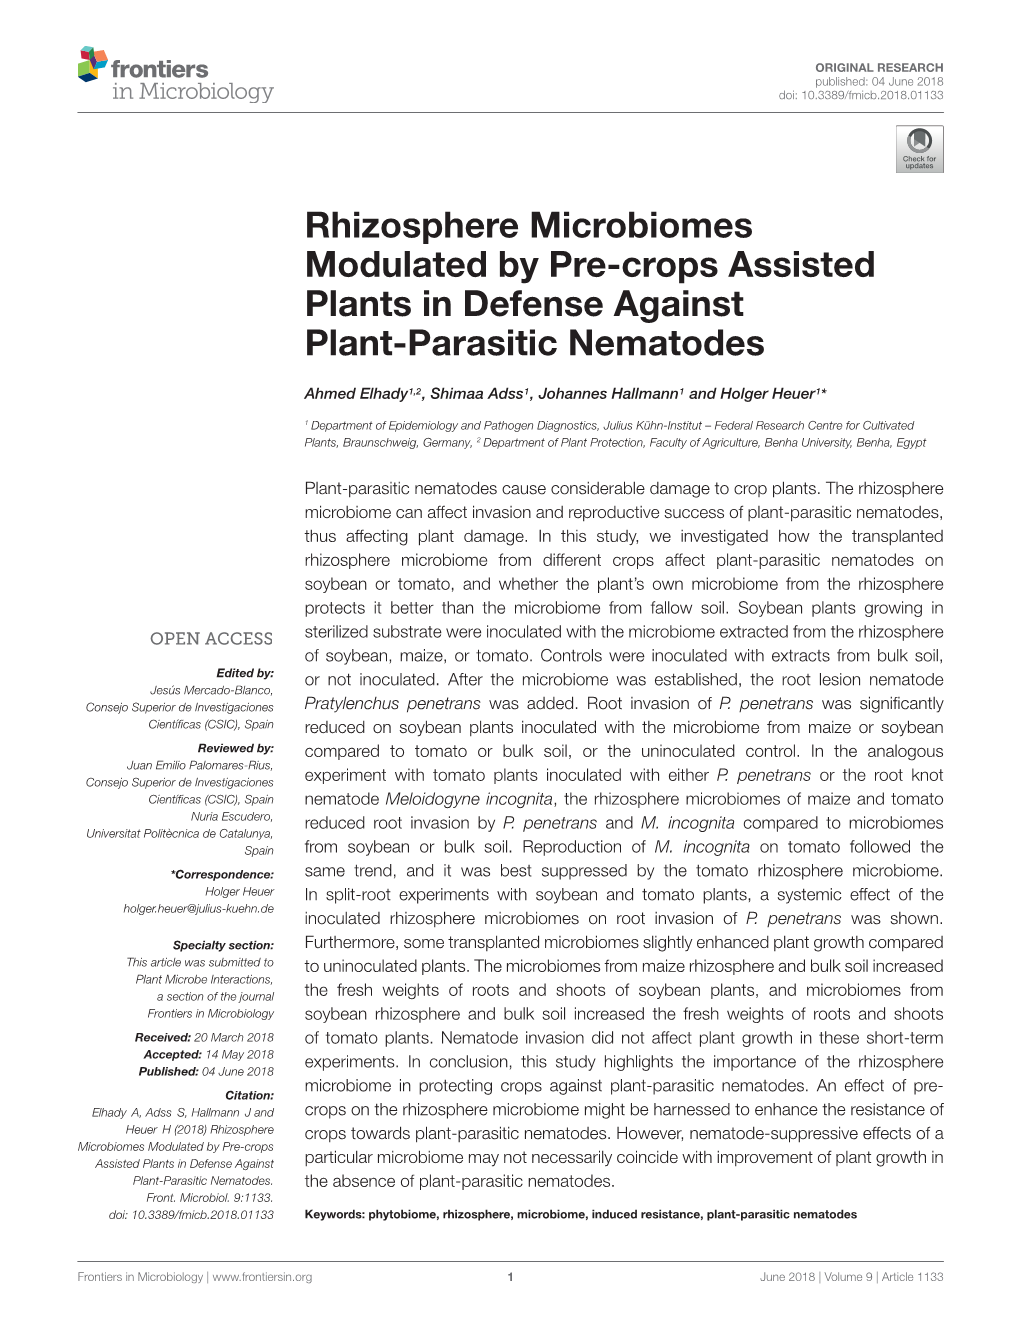 Rhizosphere Microbiomes Modulated by Pre-Crops Assisted Plants in Defense Against Plant-Parasitic Nematodes